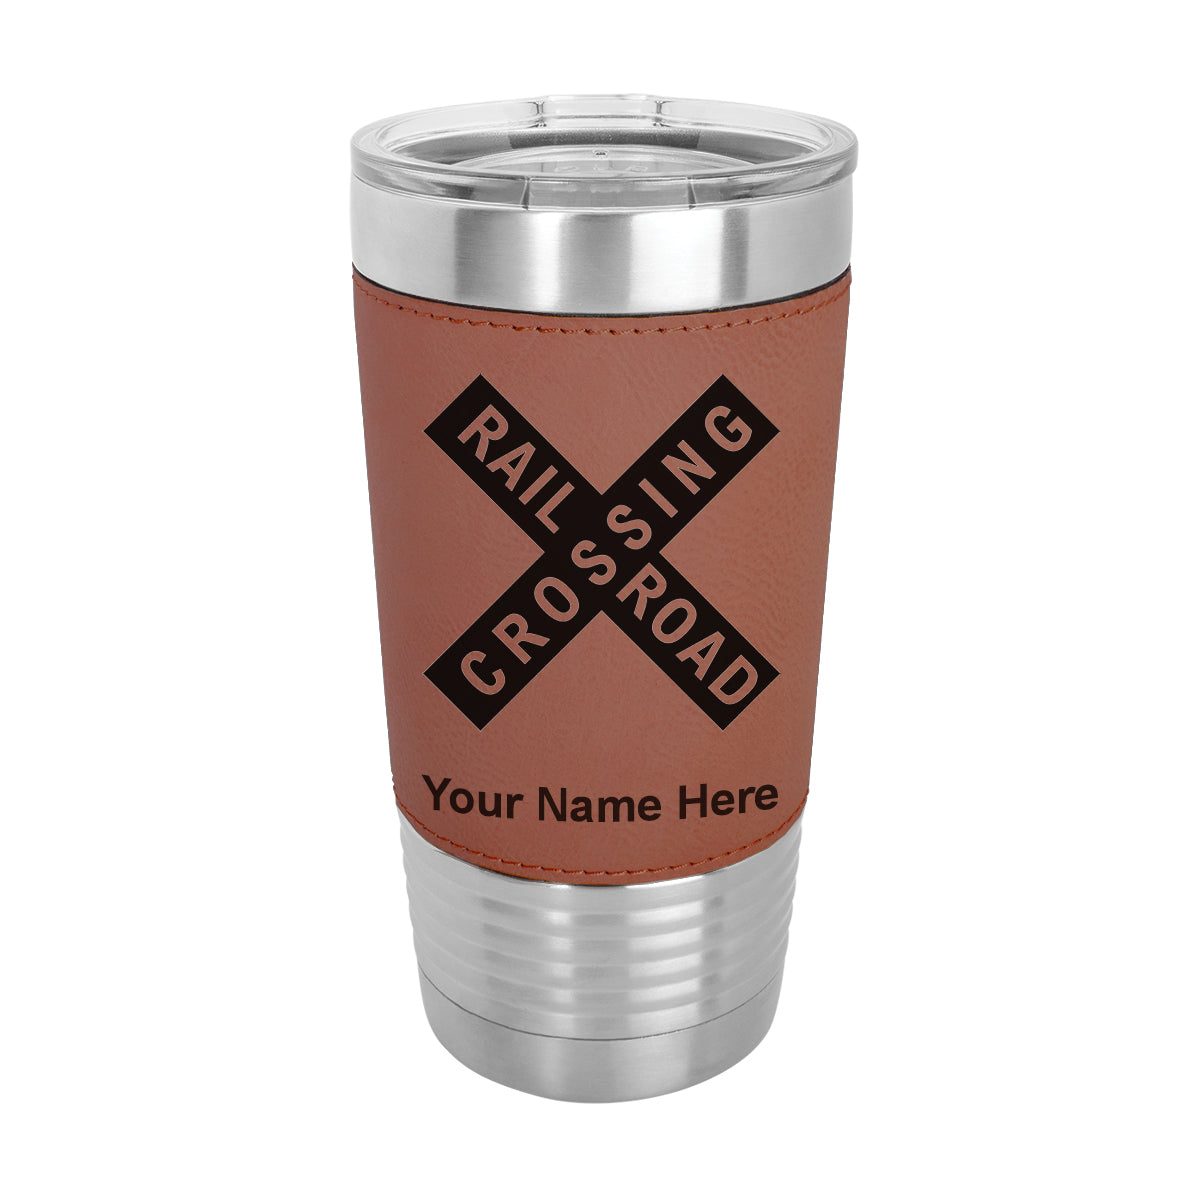 20oz Faux Leather Tumbler Mug, Railroad Crossing Sign 1, Personalized Engraving Included - LaserGram Custom Engraved Gifts